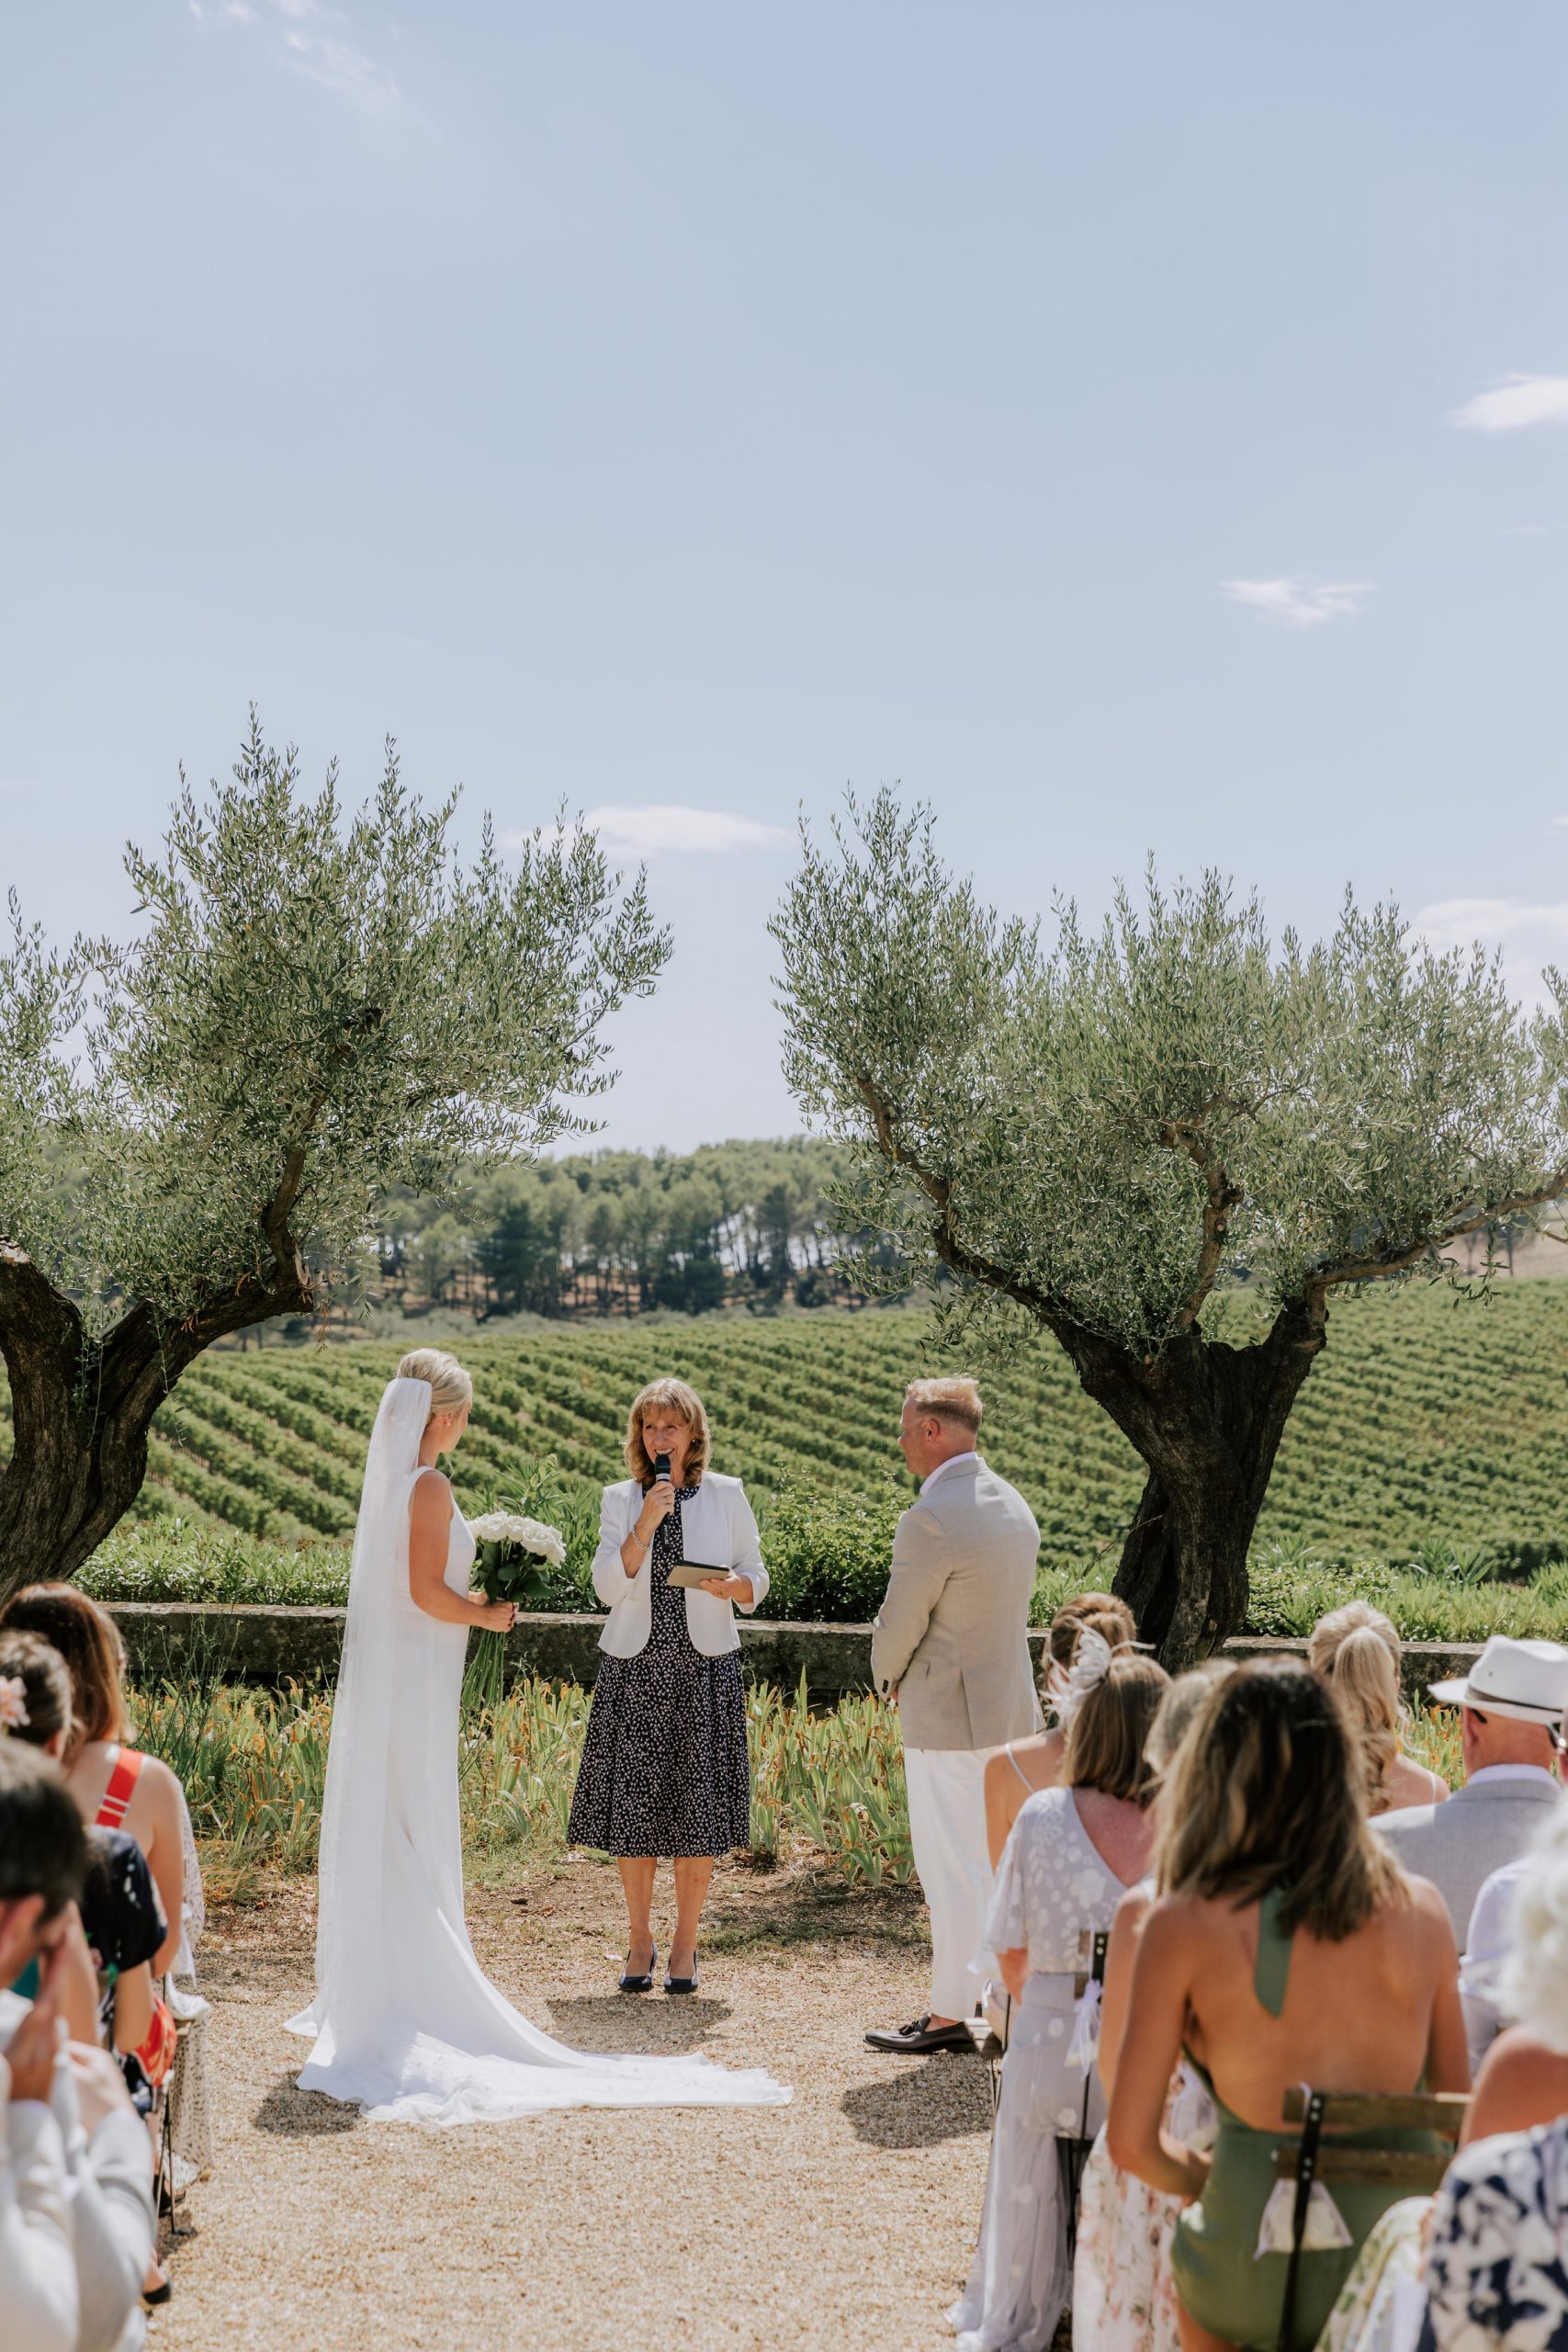 Wedding among the olive trees and vineyards